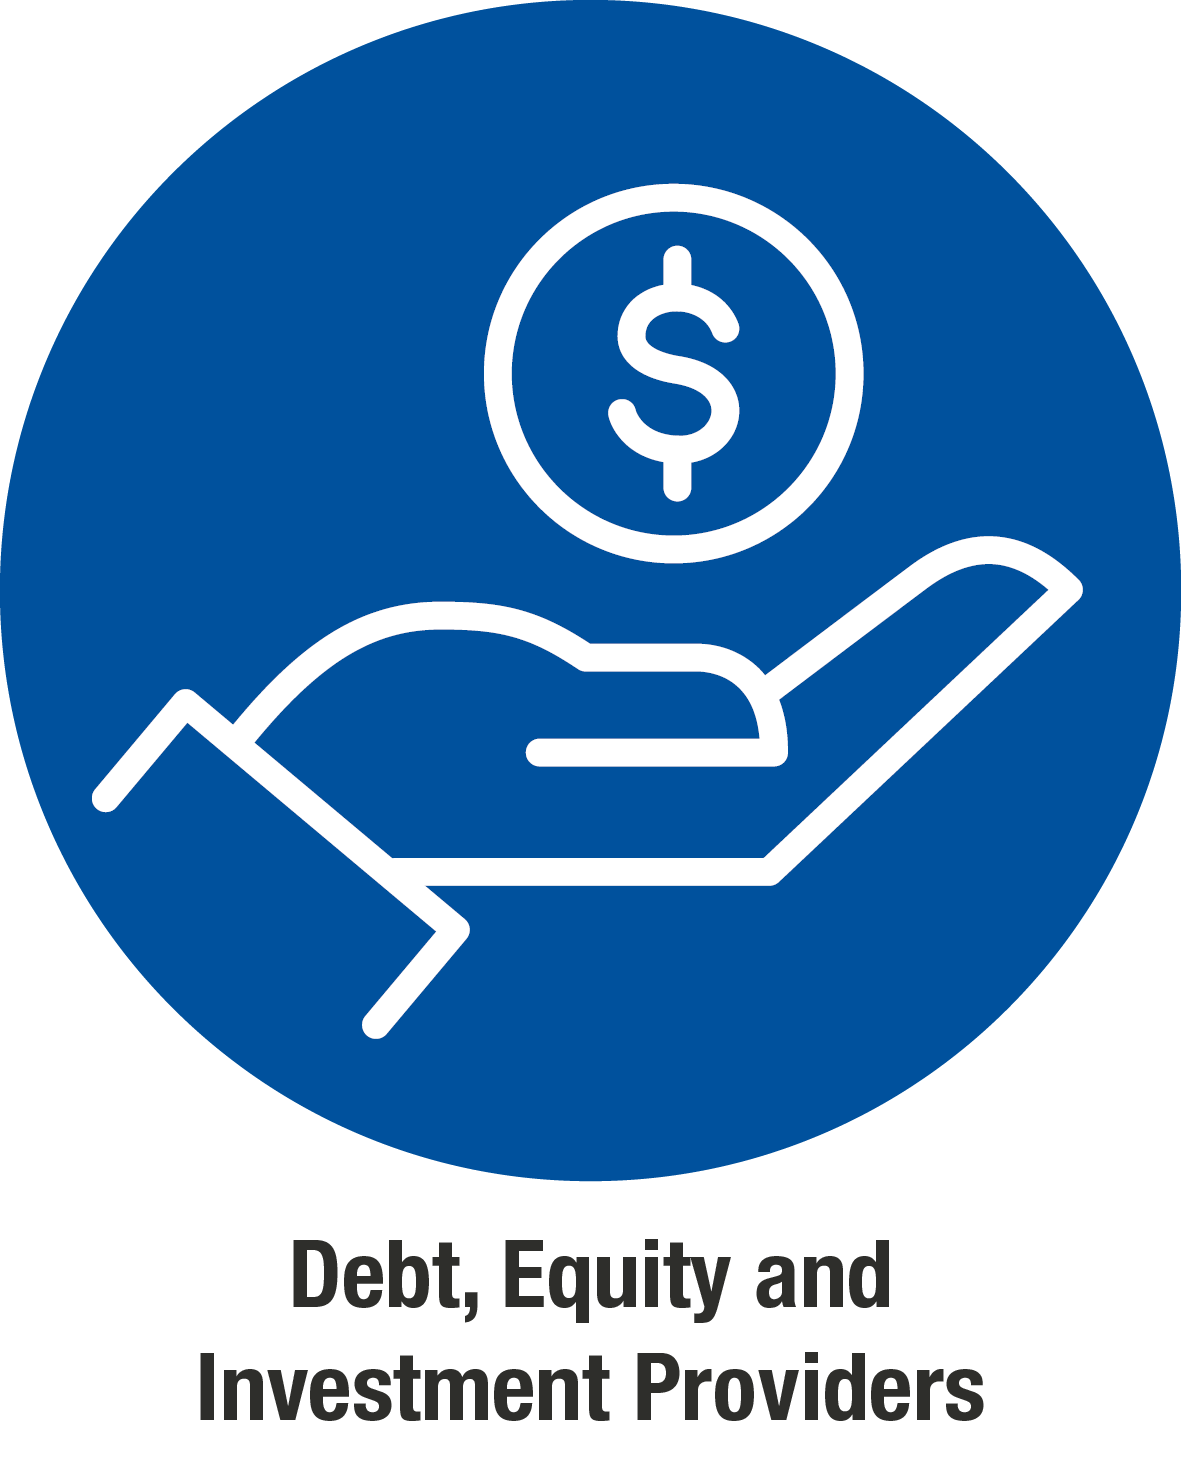 Debt, Equity and Investment Providers